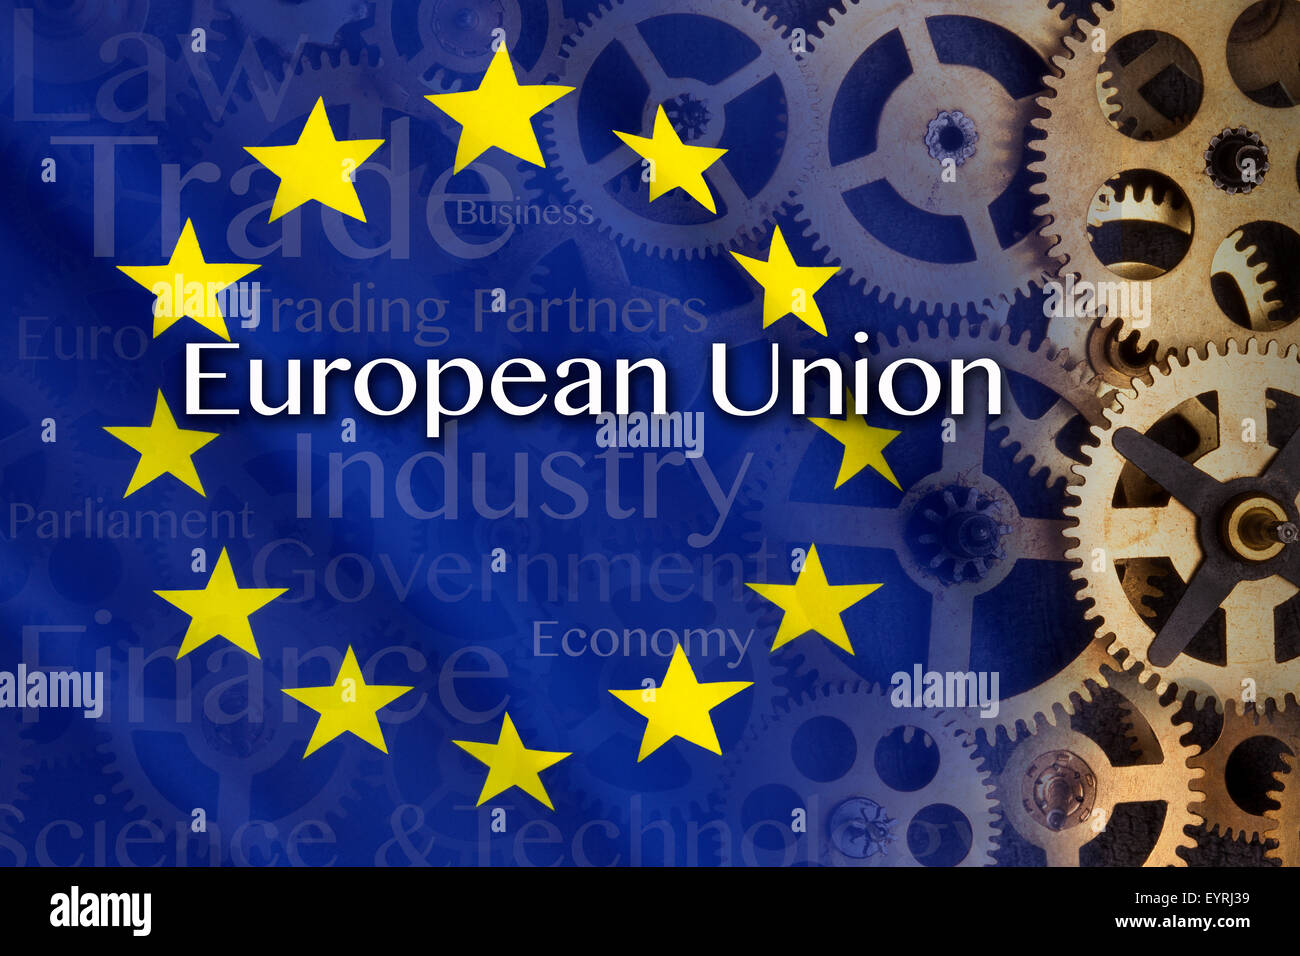 Trade and Industry in the European Union Stock Photo